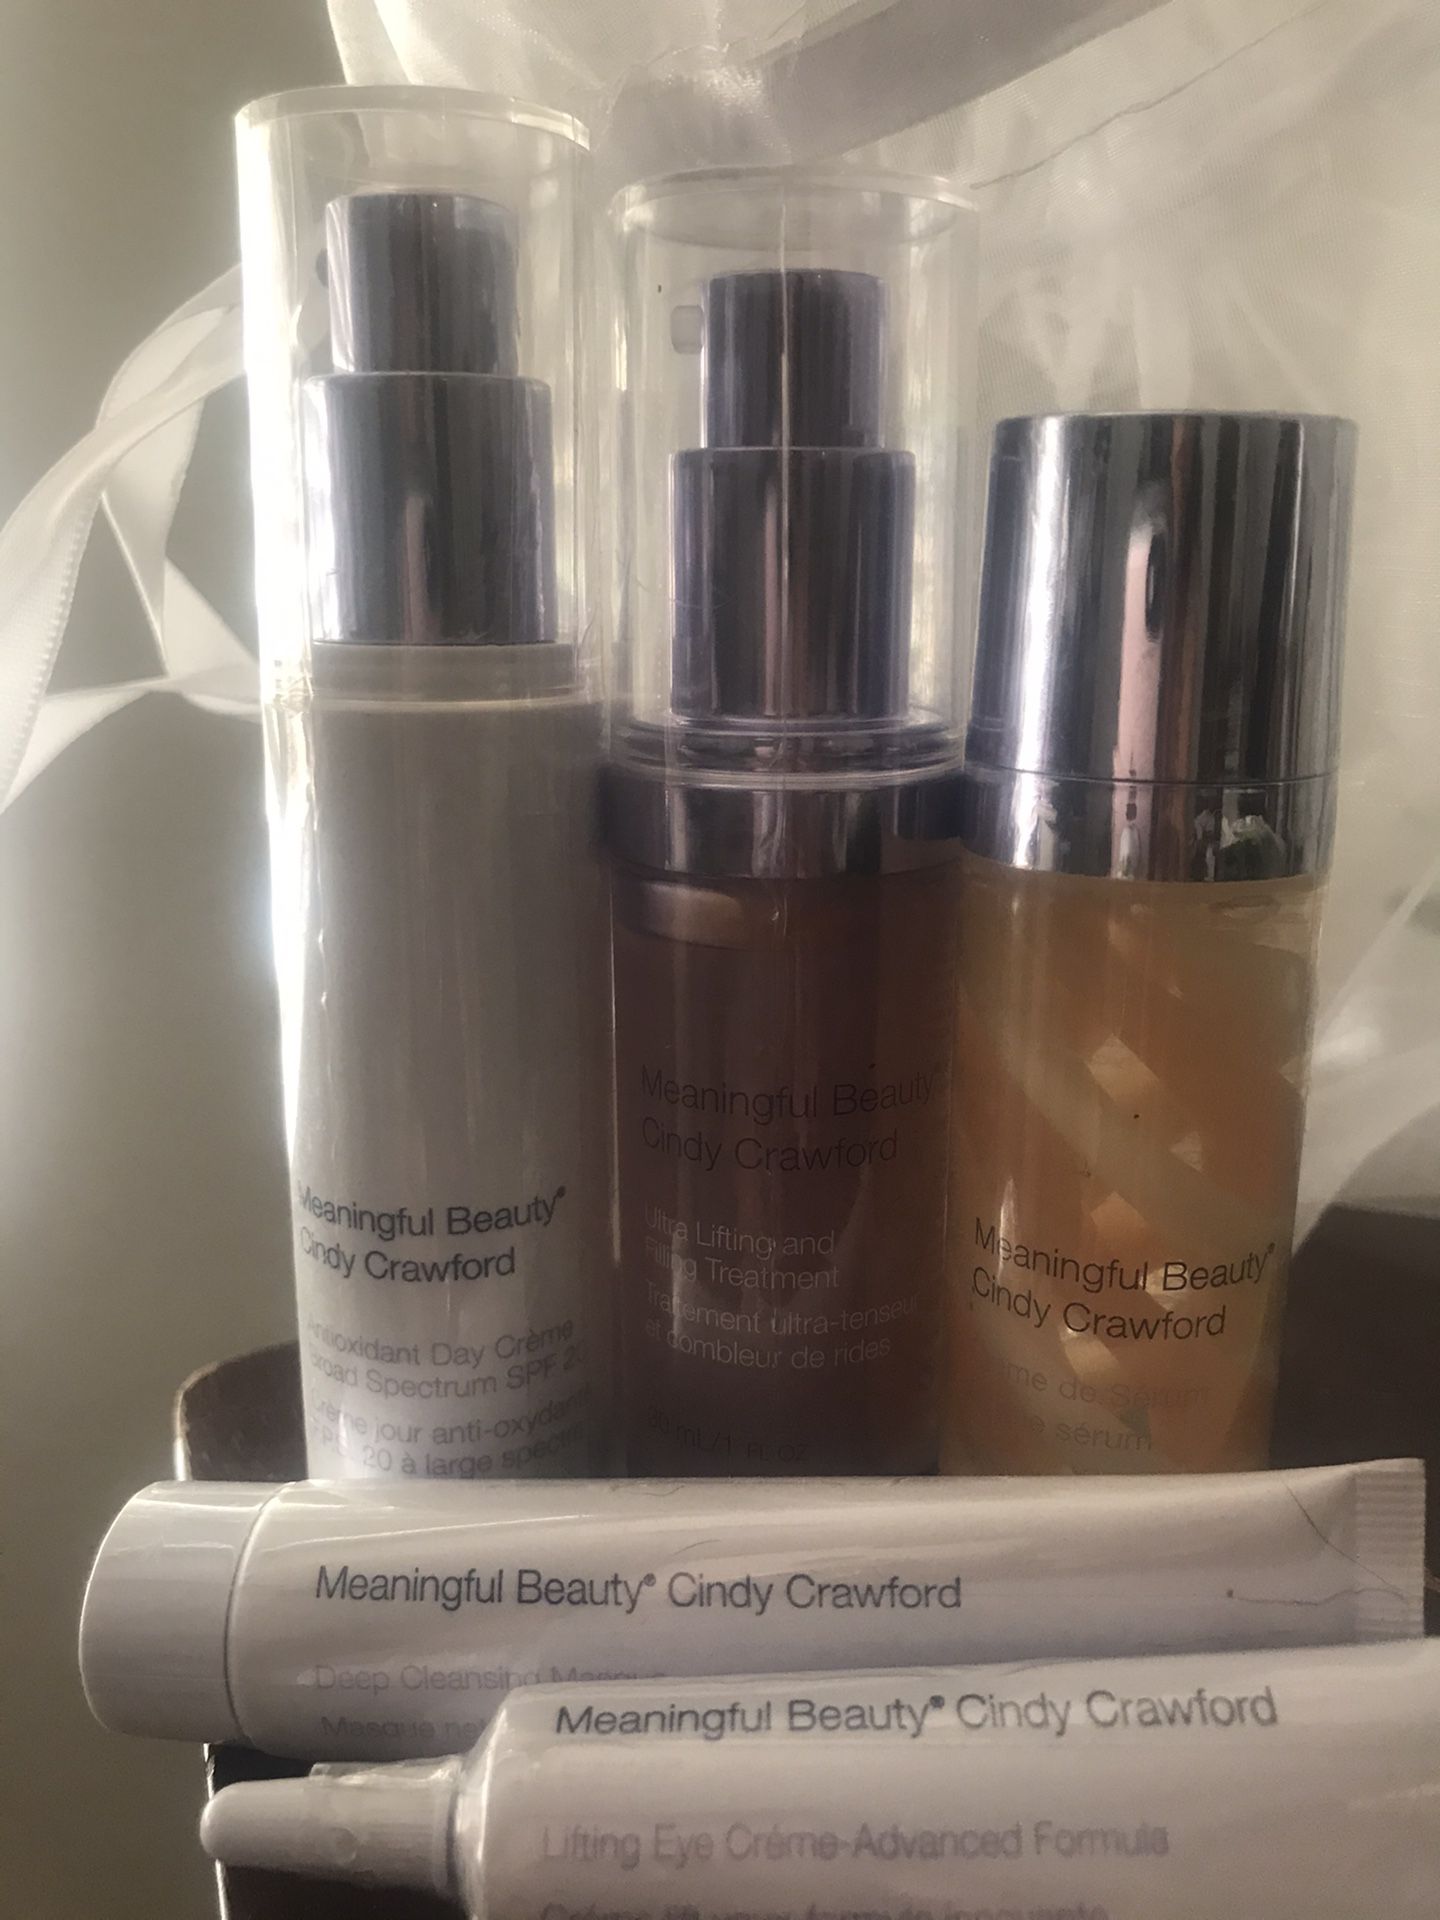 Cindy Crawford’s Meaningful Beauty set with meshed bag